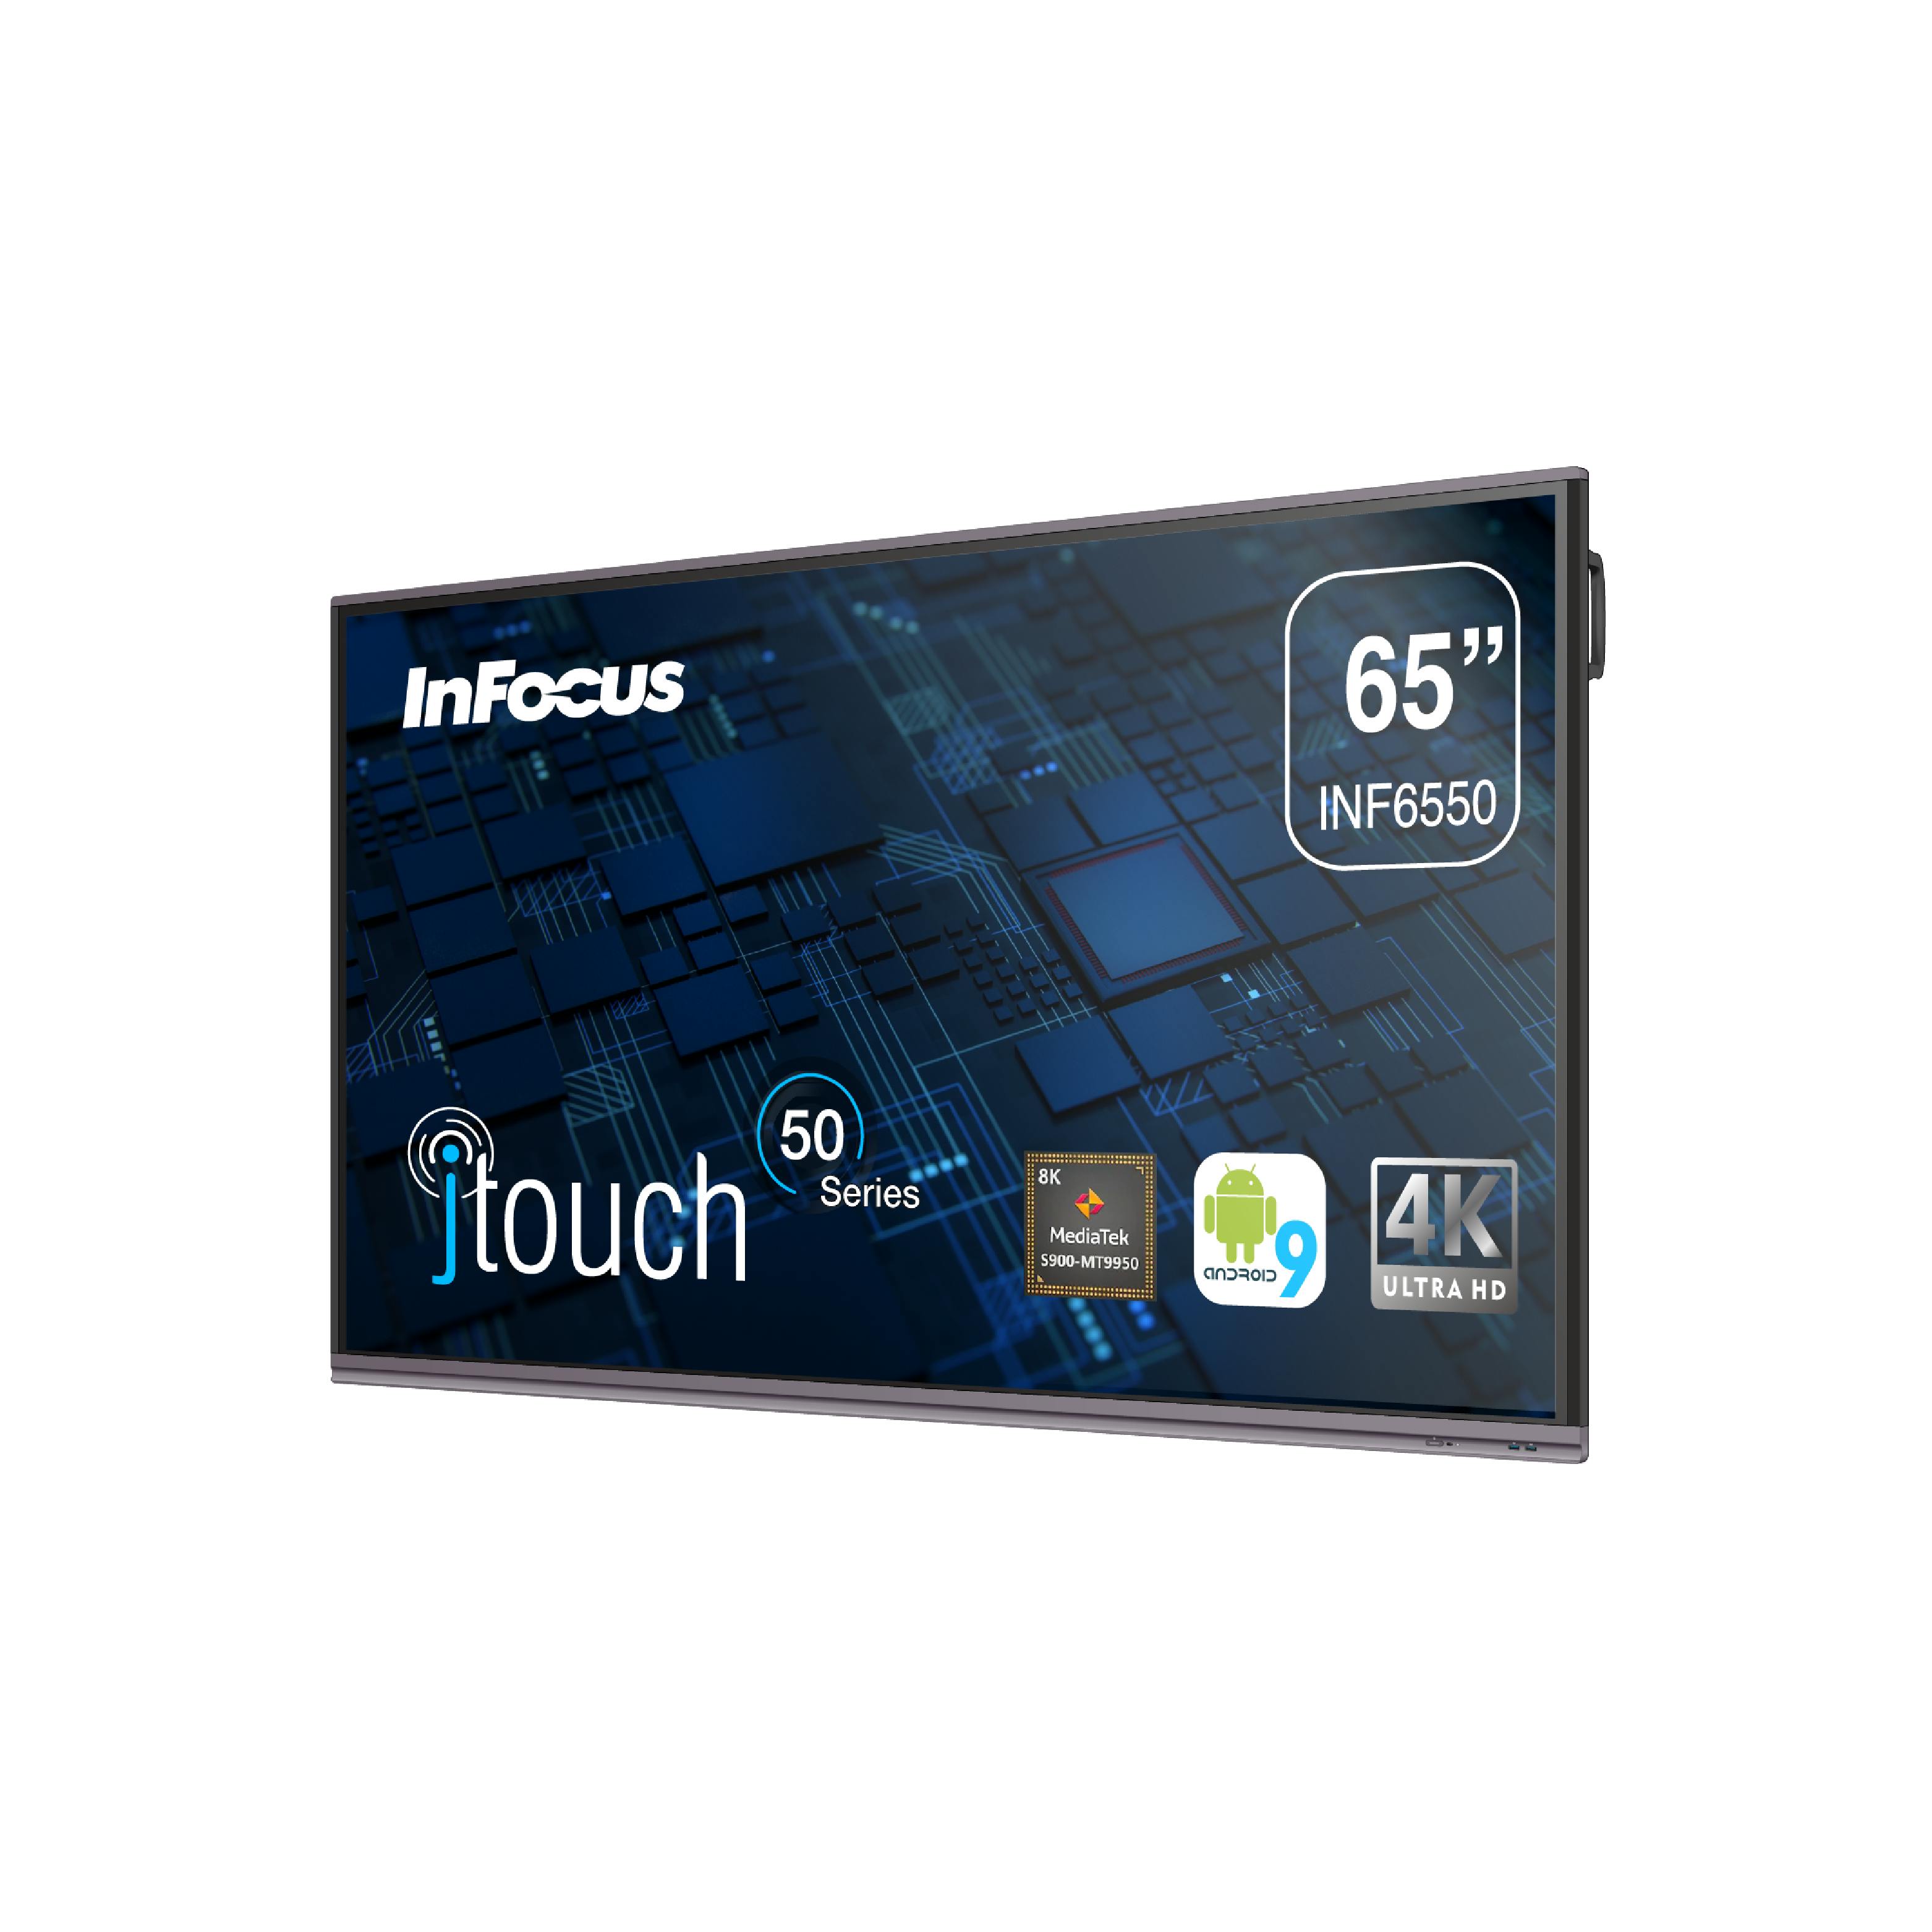 JTouch-50-Series_INF6550_FR_90-01.png